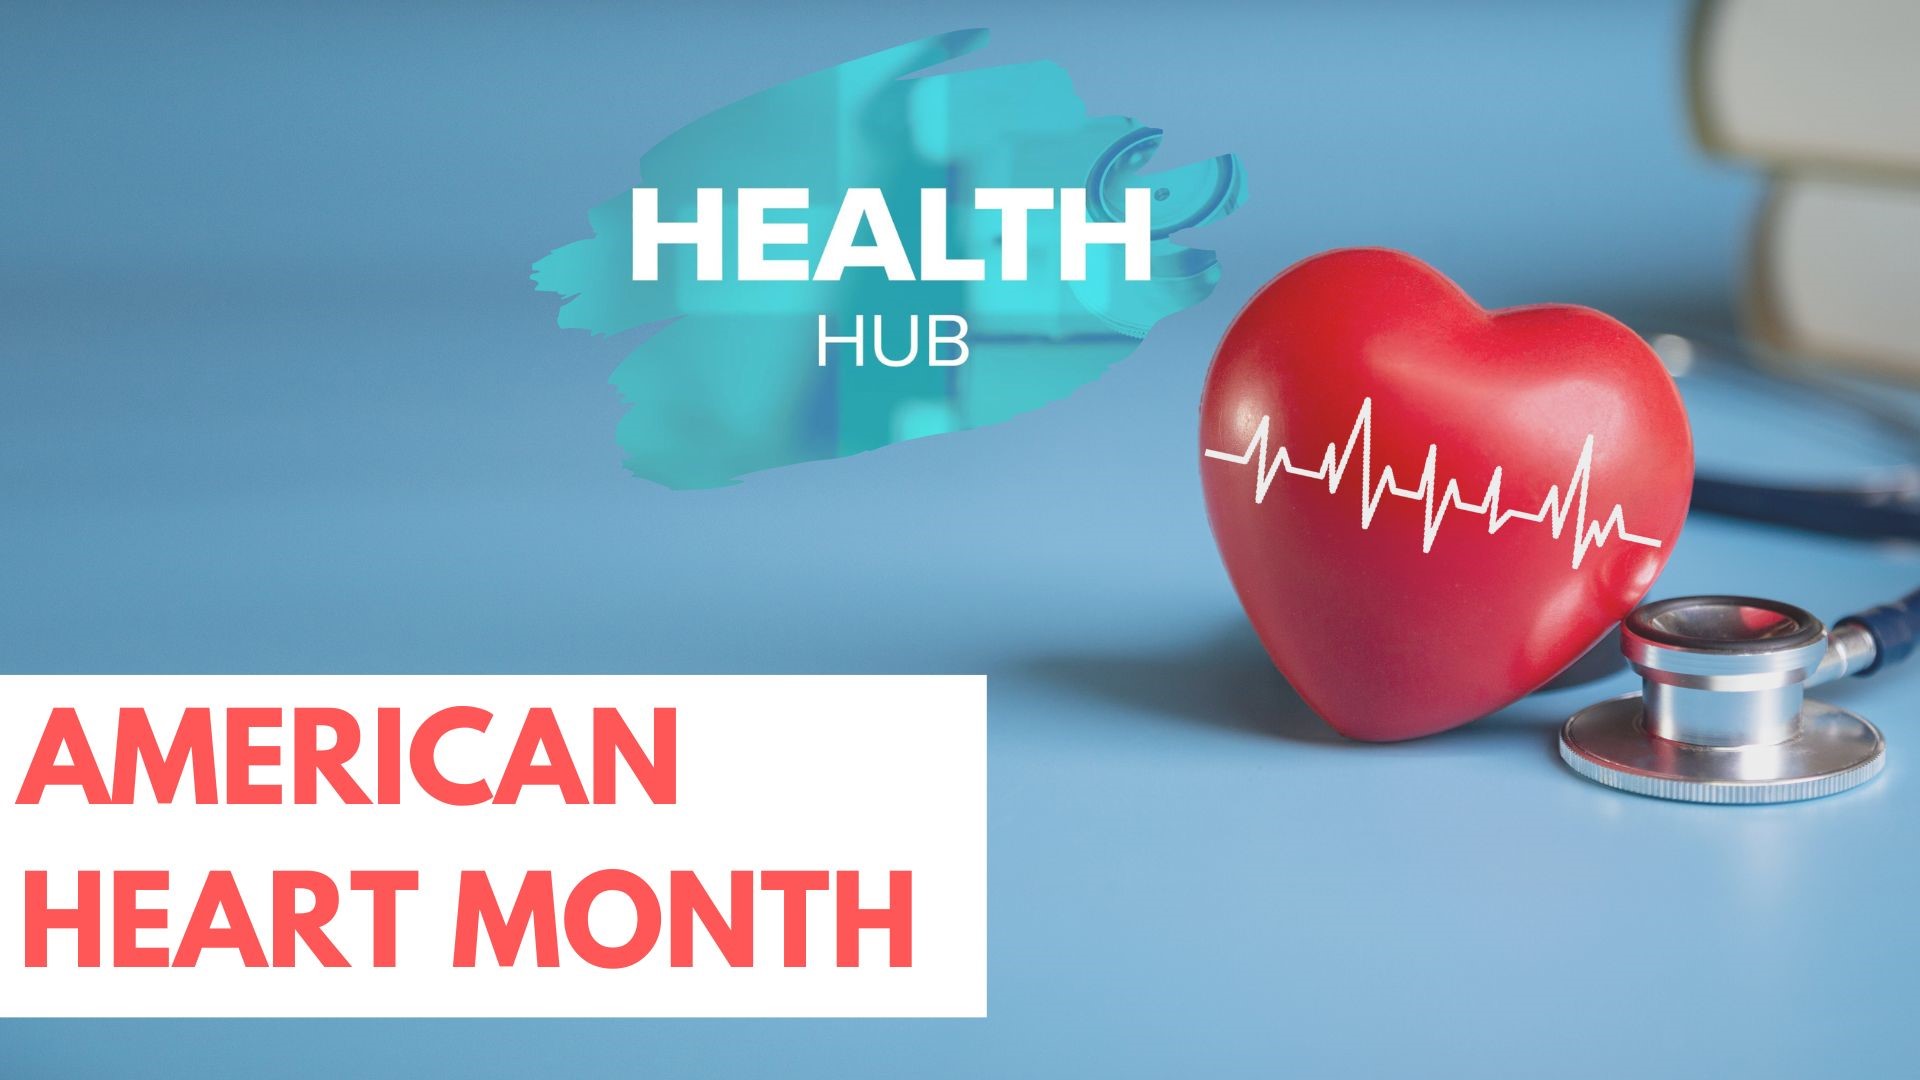 February is American Hearth month. Experts and advocates share stories about improving heart health.